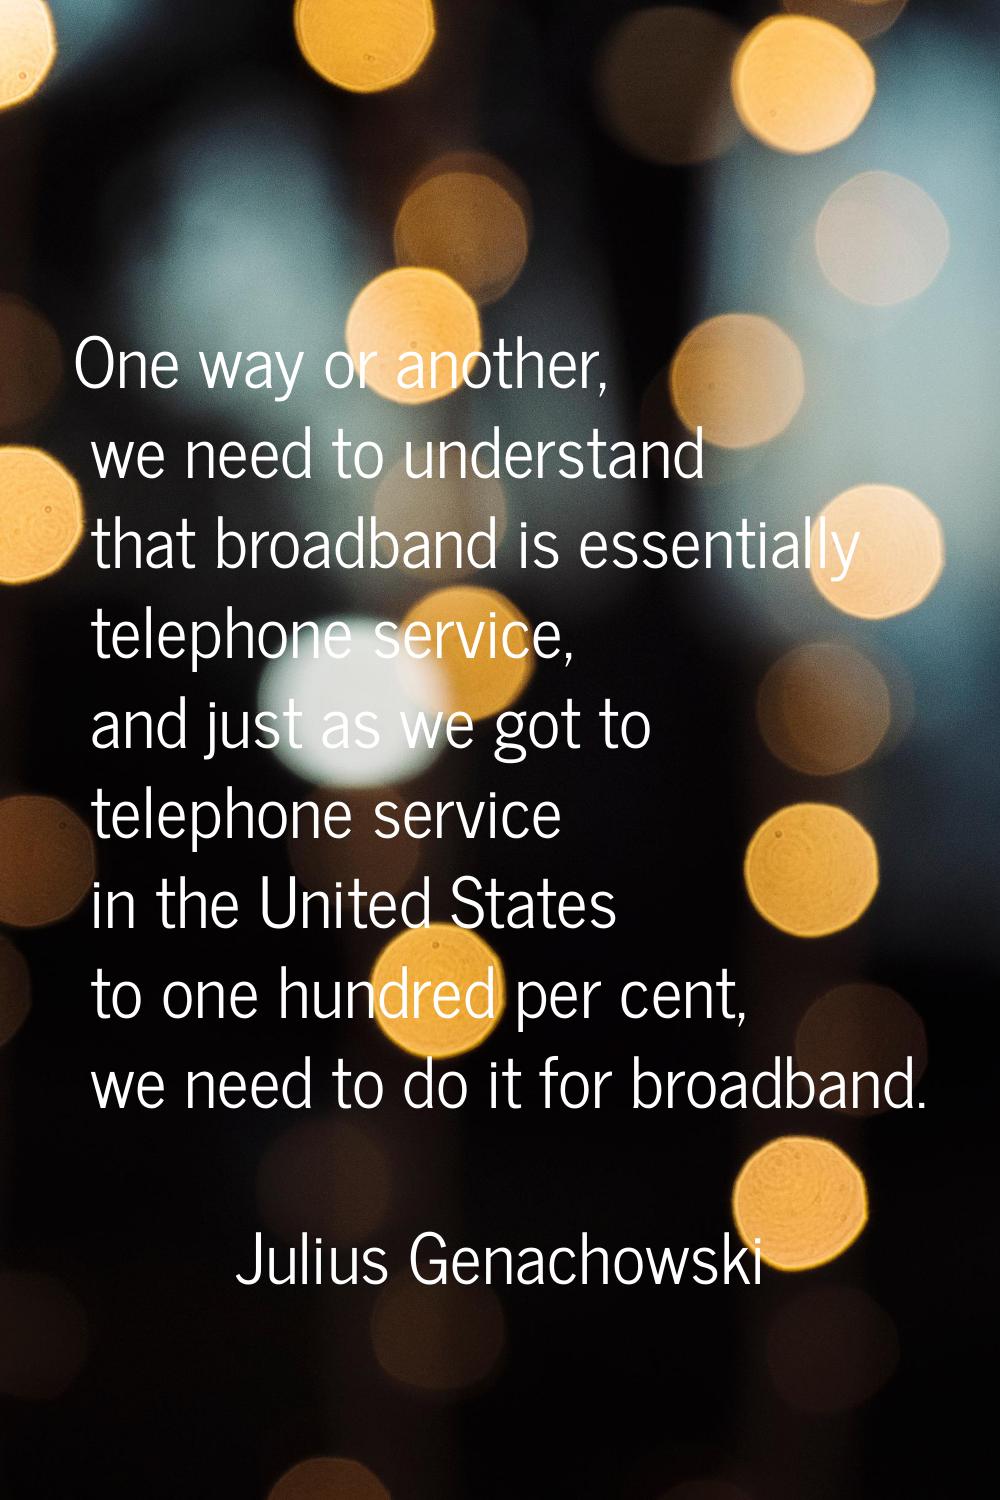 One way or another, we need to understand that broadband is essentially telephone service, and just